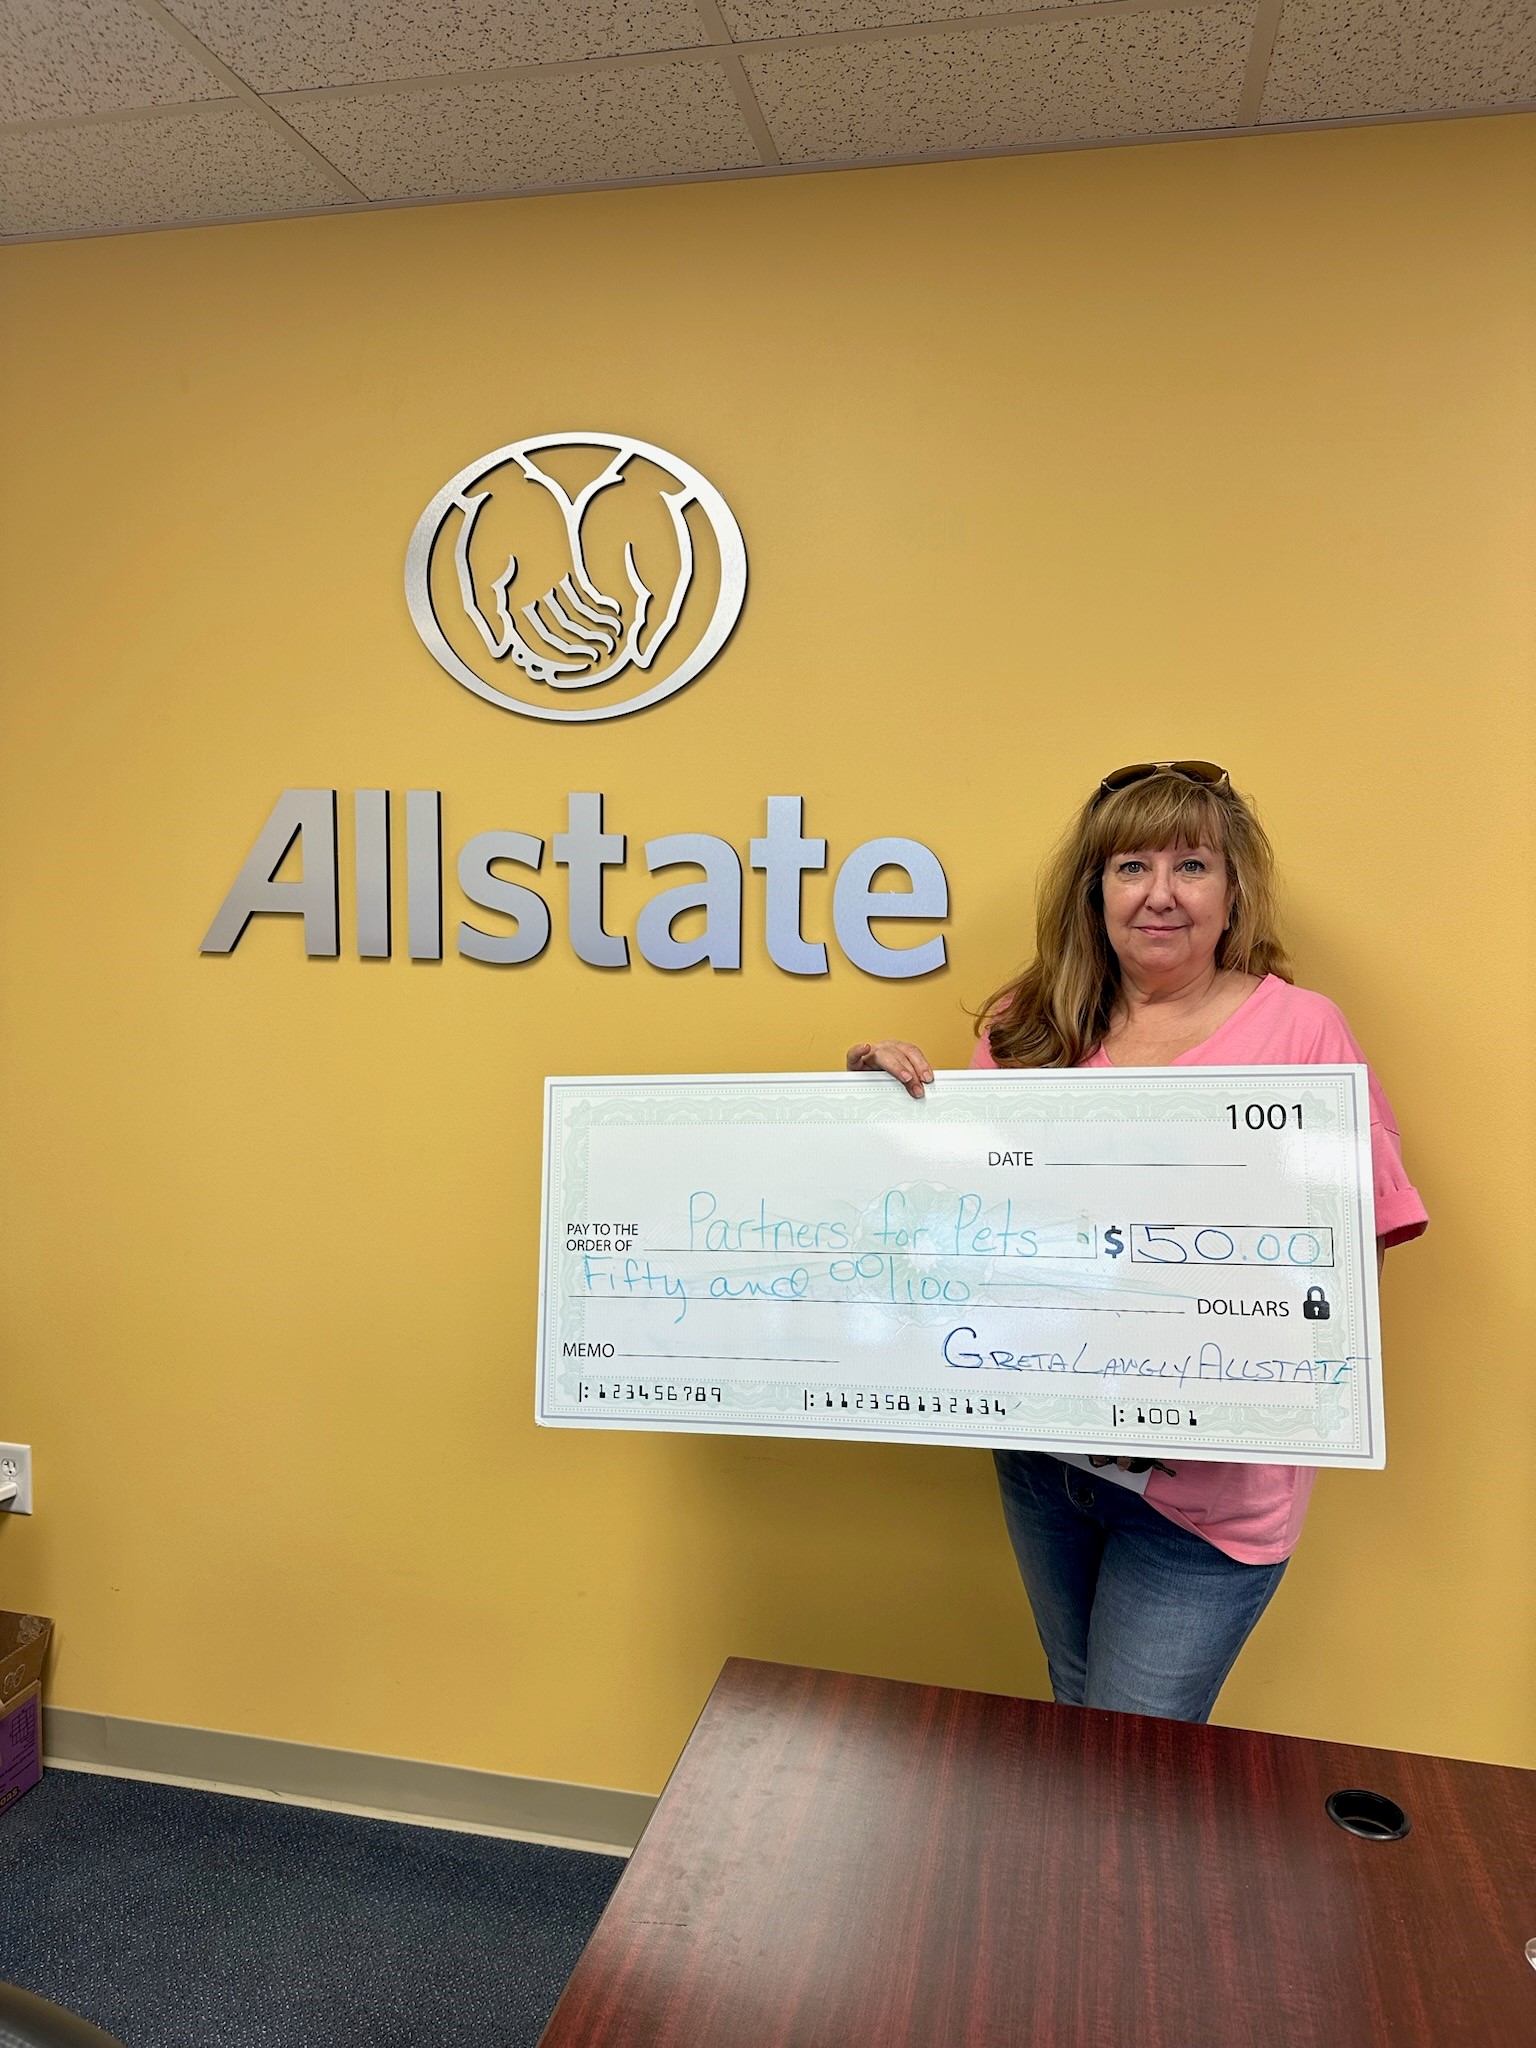 We love animals, and this is why our Allstate agency was proud to show our support for Partners for Pets.